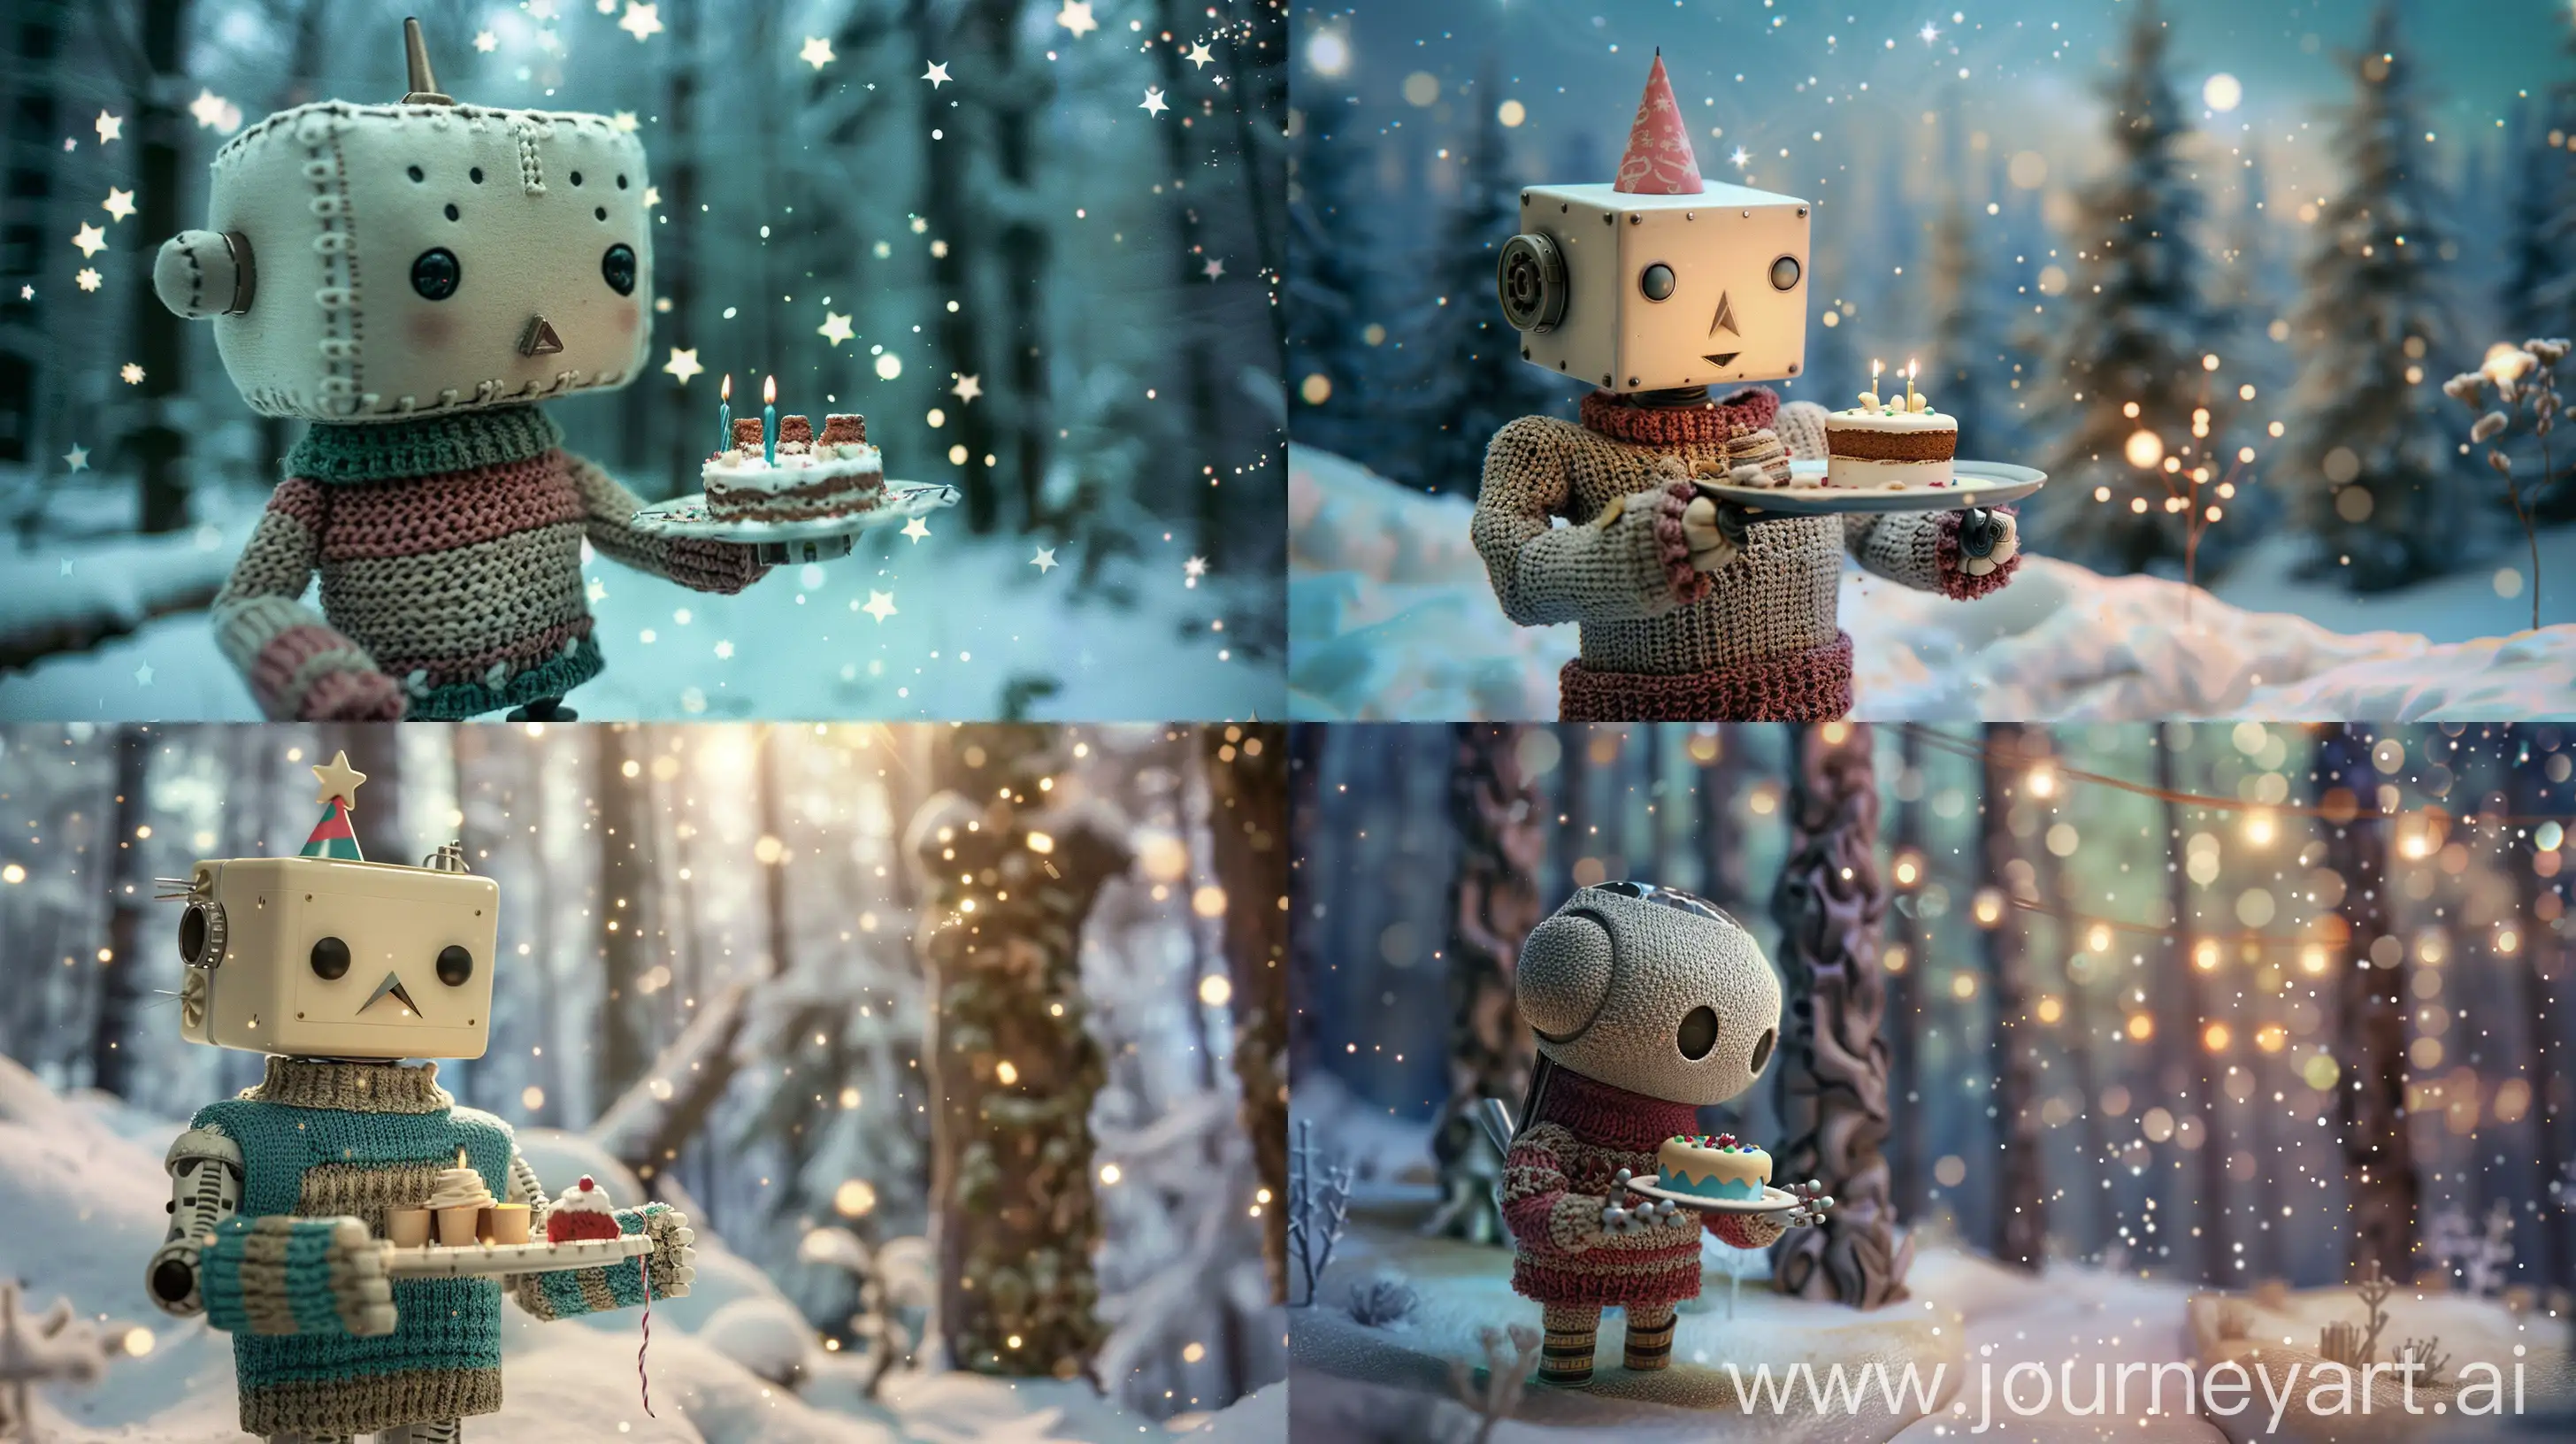 Enchanting-Snowy-Forest-Birthday-Portrait-with-Whimsical-Robot-and-Cake-Plate